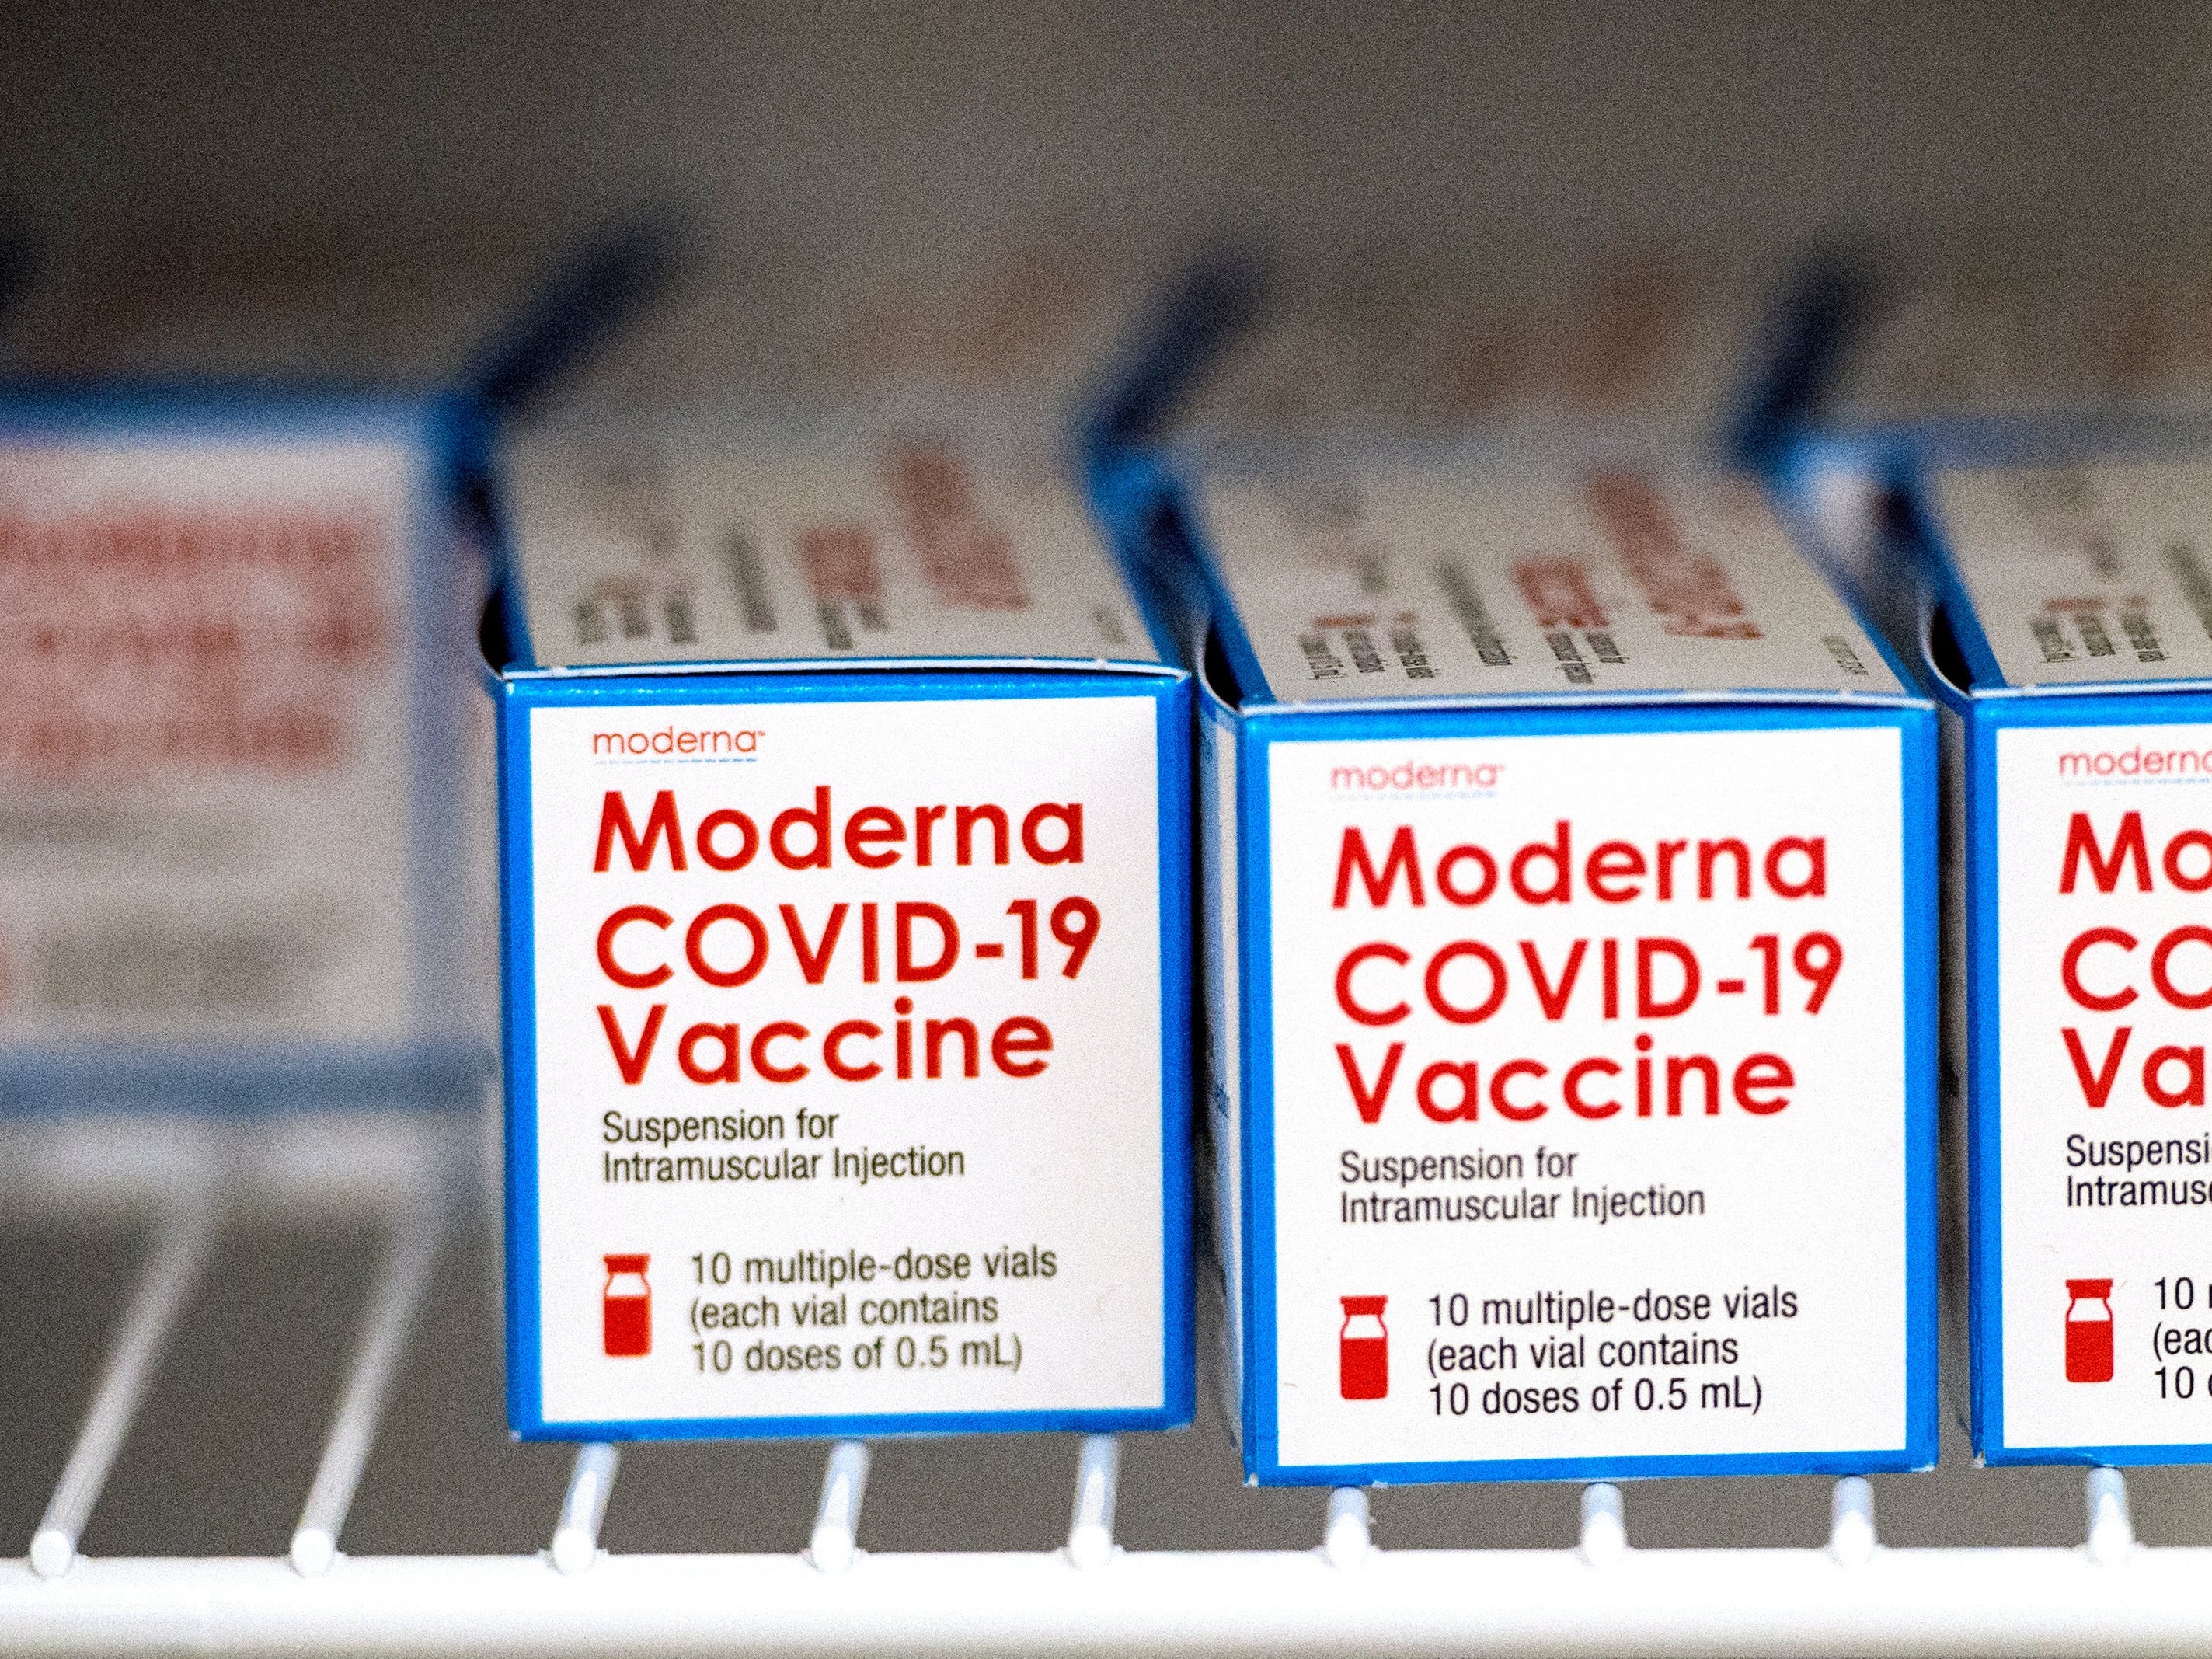 Moderna Covid vaccine has been approved for use in 12 to 17-year-olds